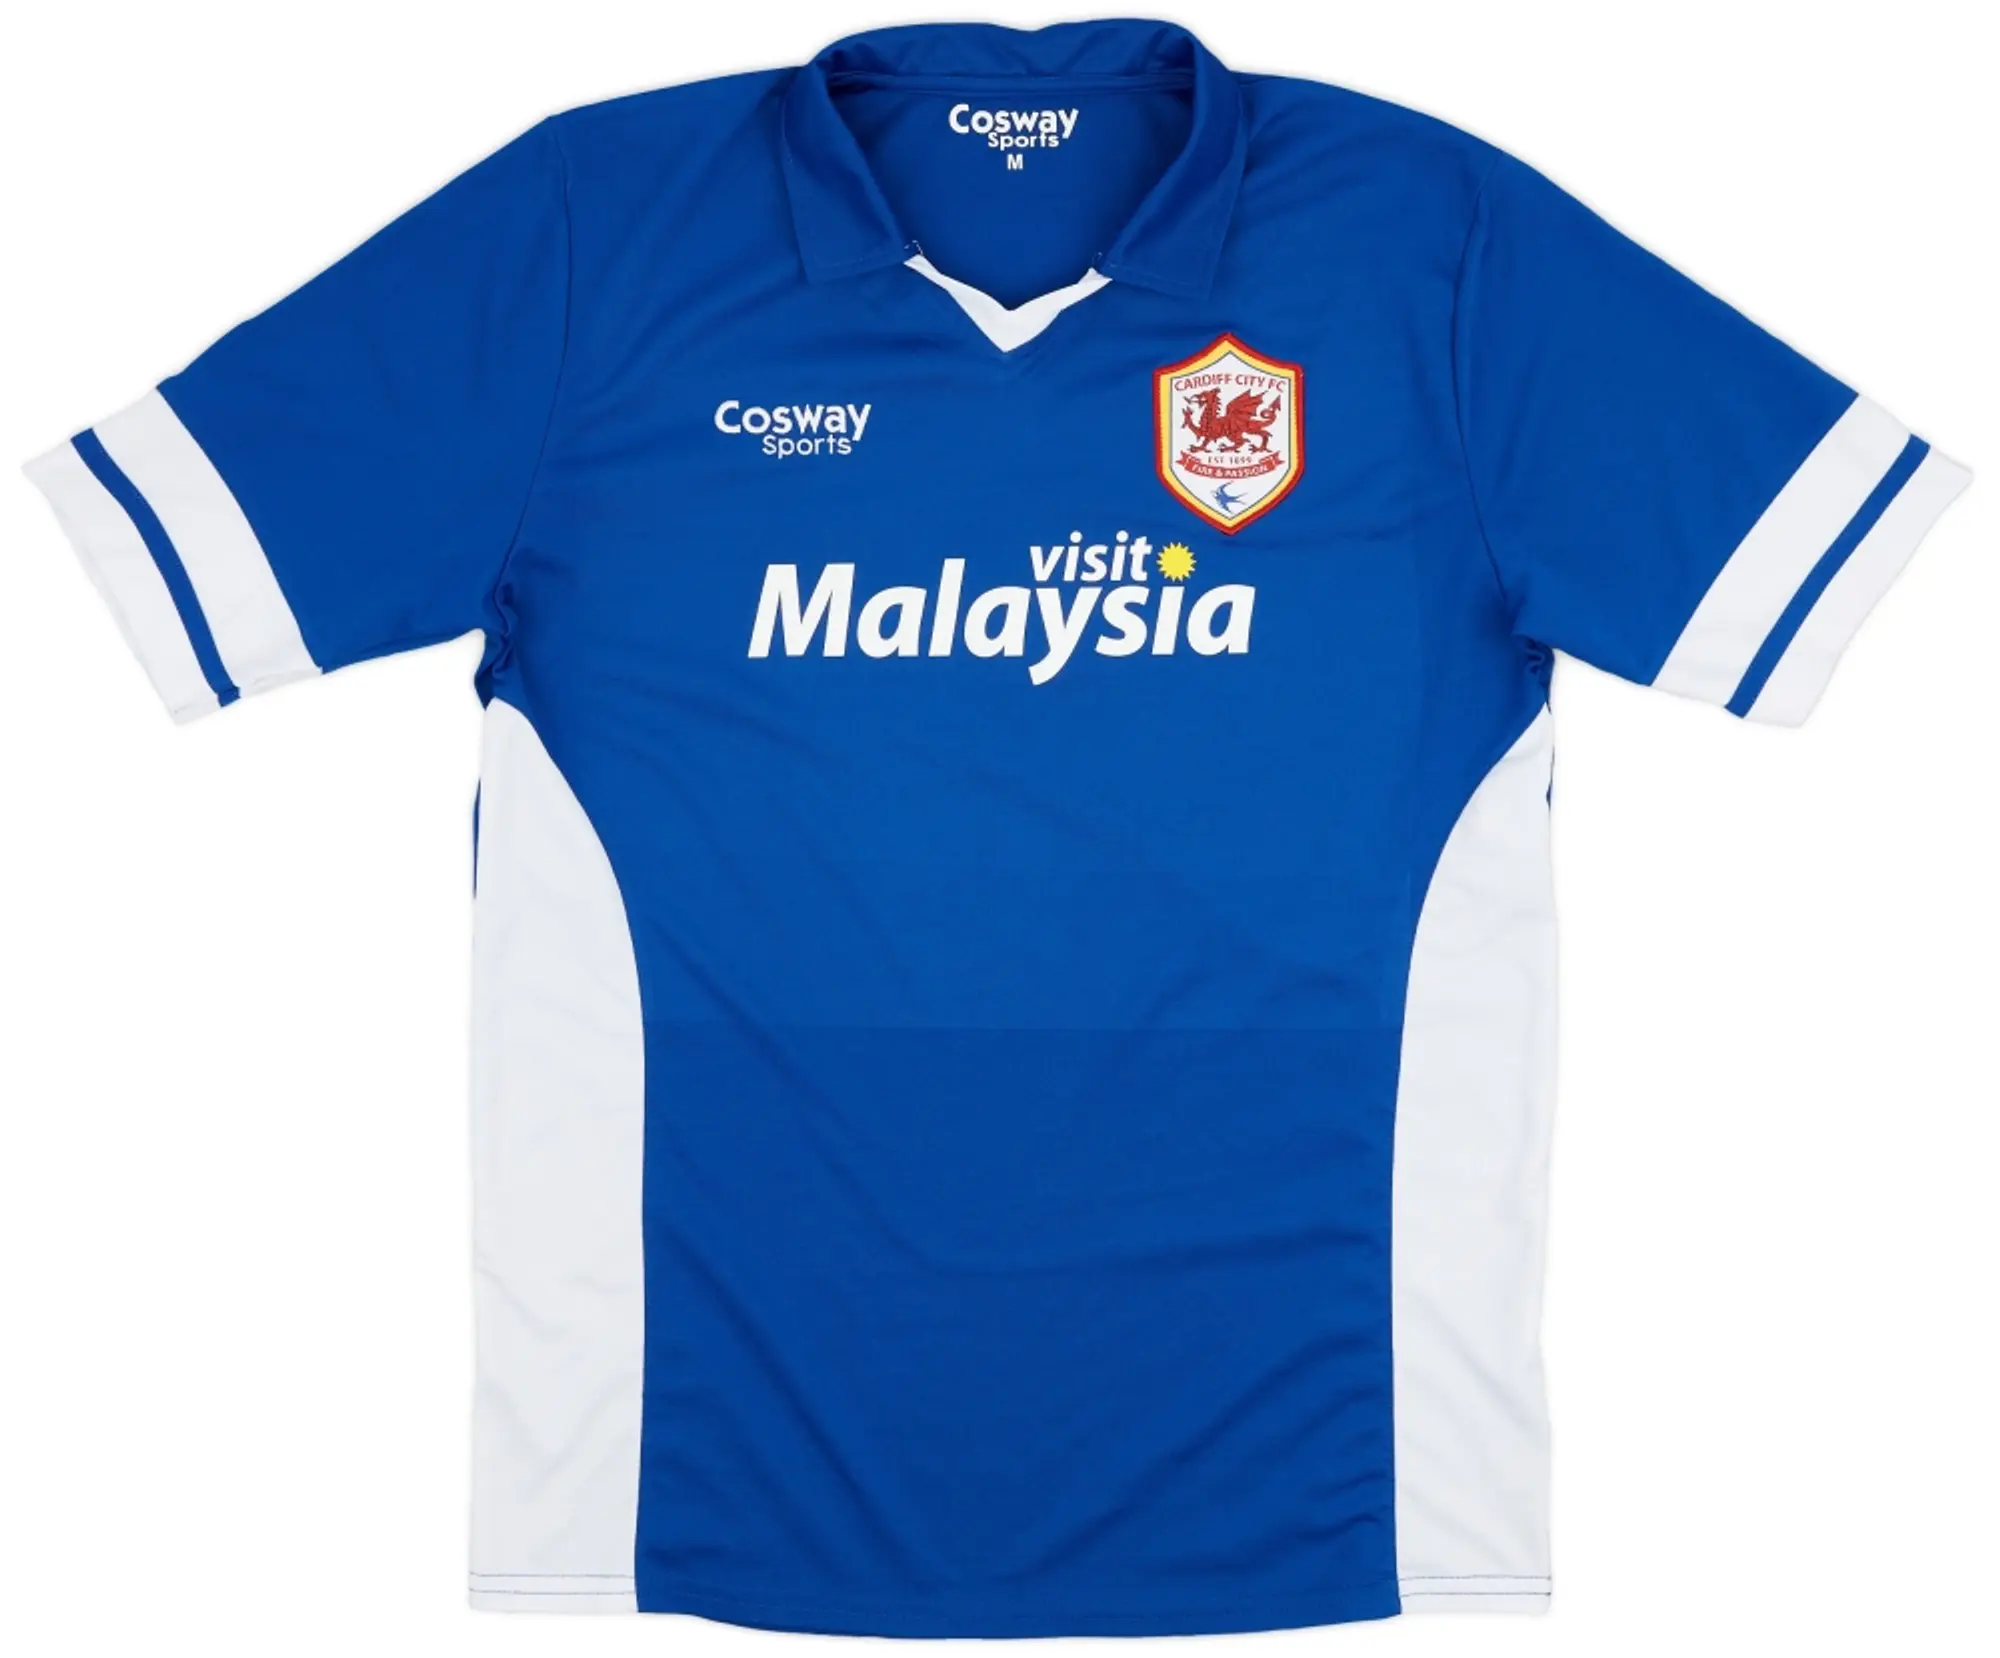 Raiders stole £1,000 of football kits from Cardiff City club shop